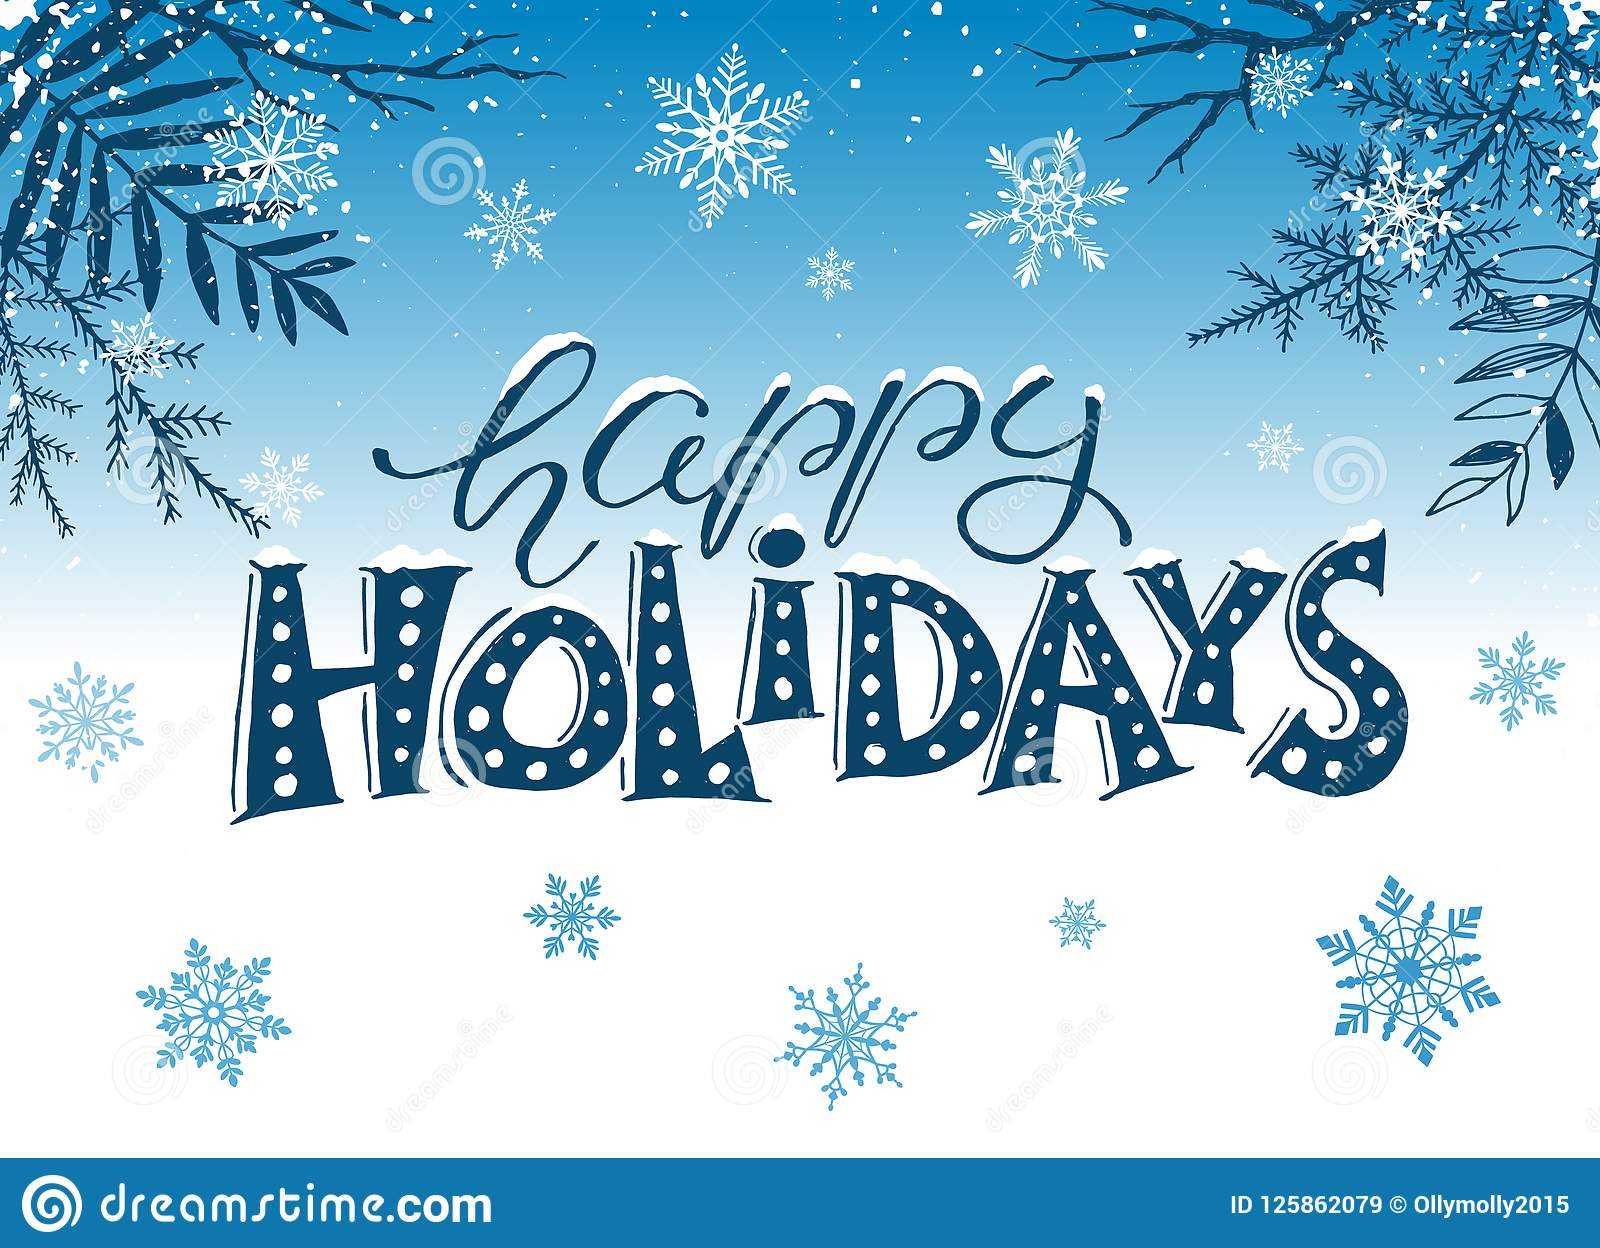 Happy Holidays Greeting Card Stock Vector – Illustration Of With Happy Holidays Card Template